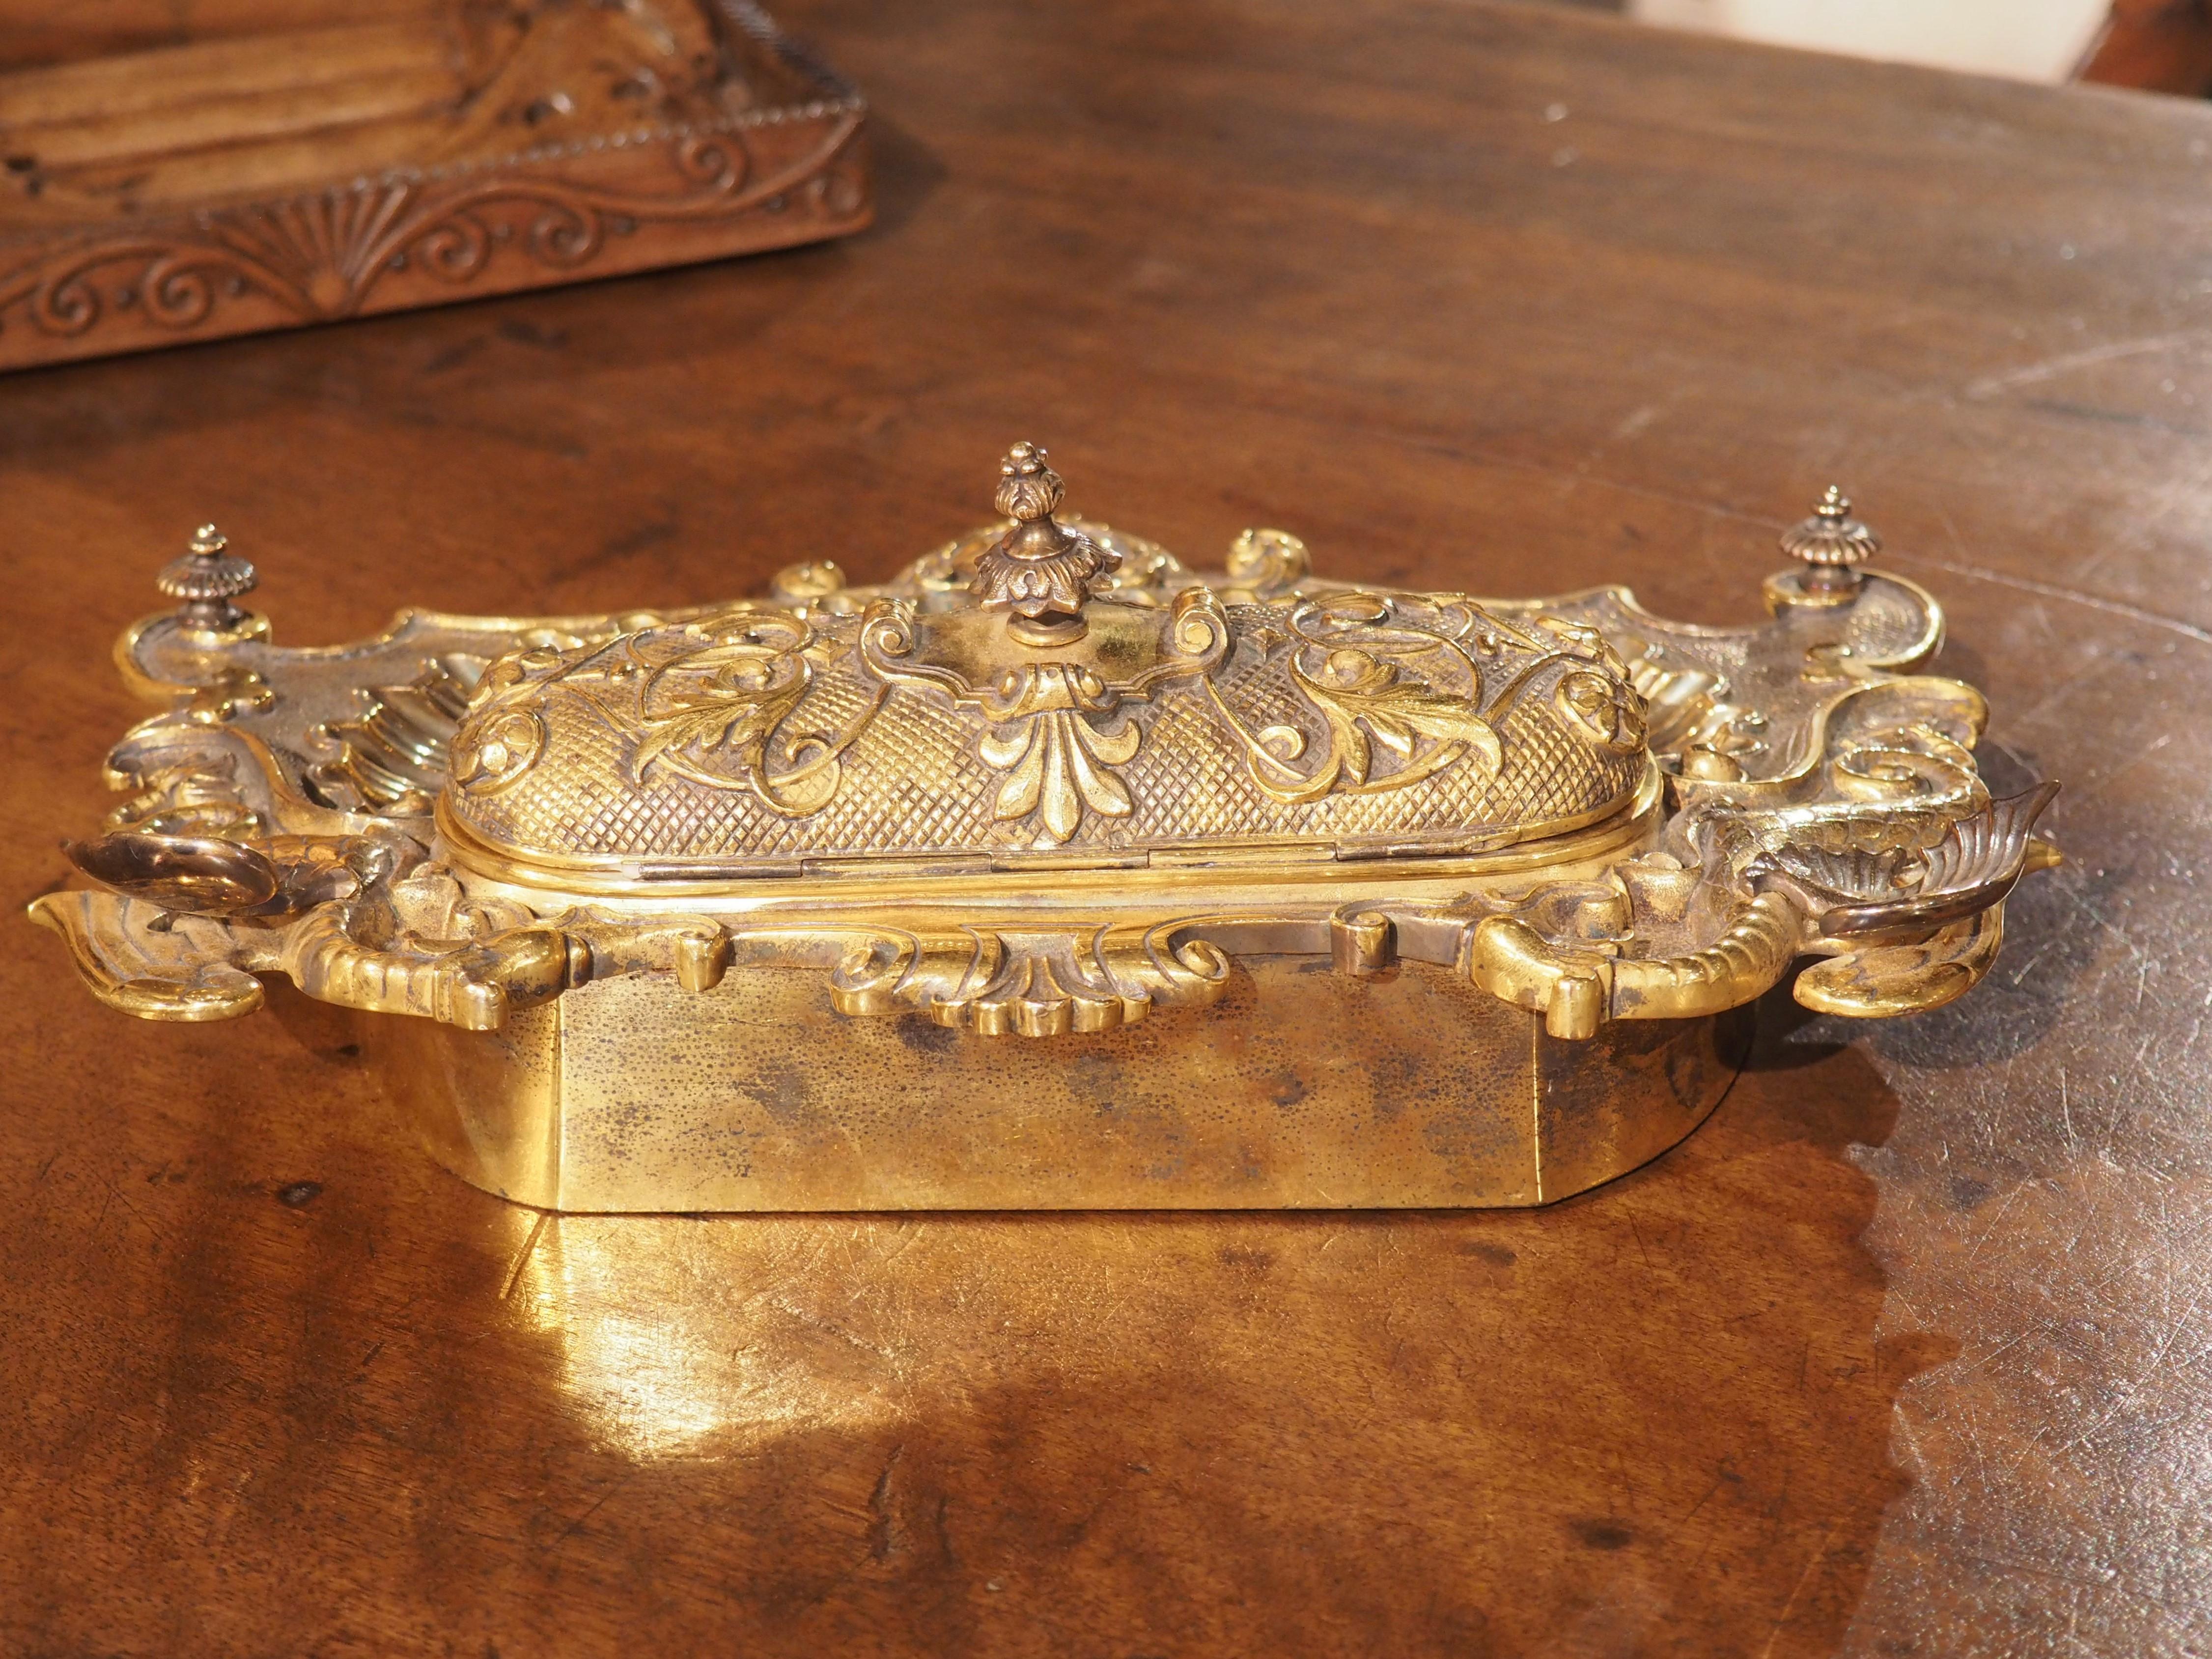 Napoleon III Gilt Bronze Inkwell from France, C. 1840 For Sale 4